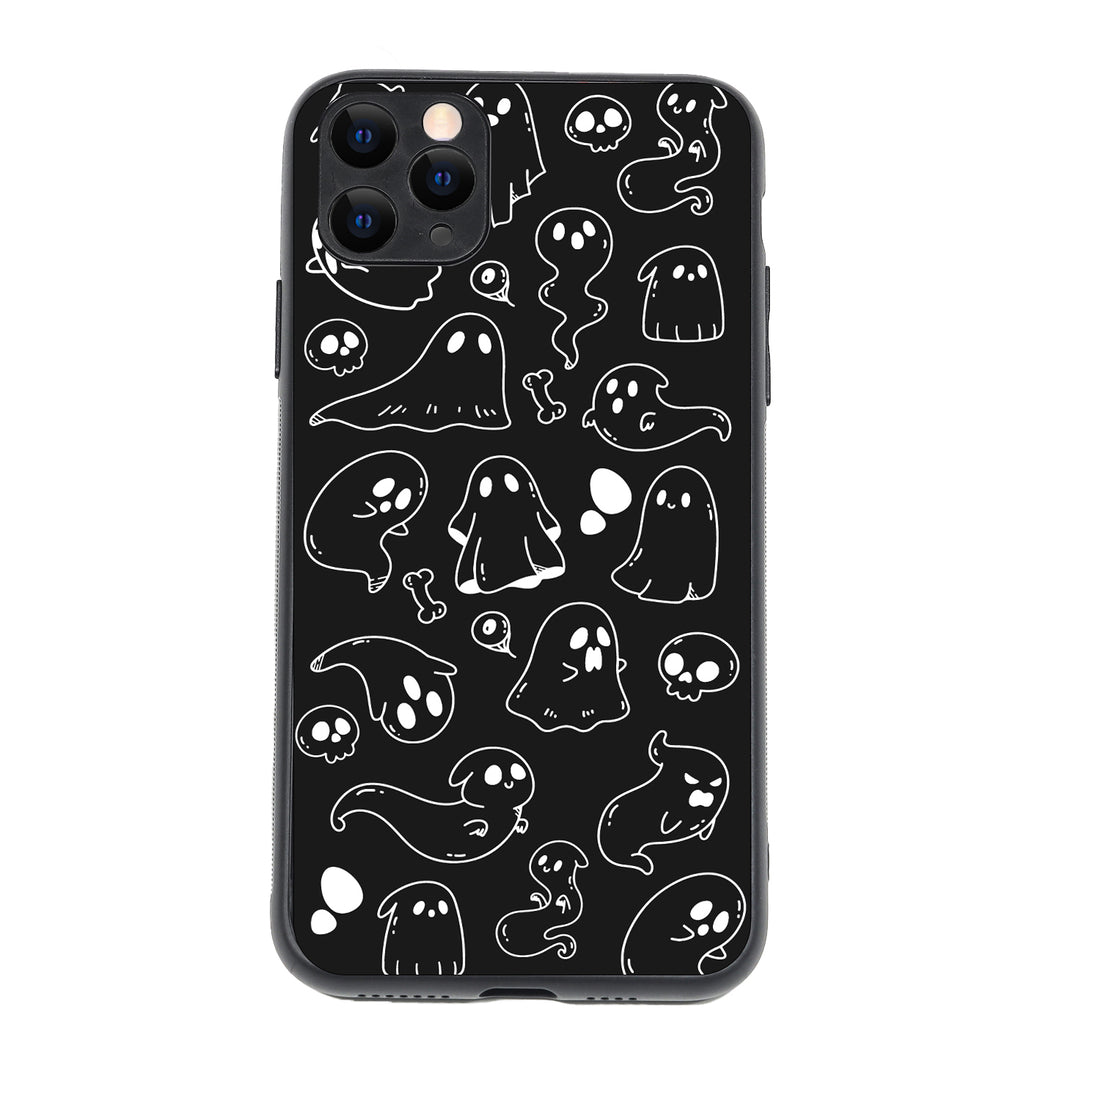 Black Ghost Doodle iPhone 11 Pro Max Case